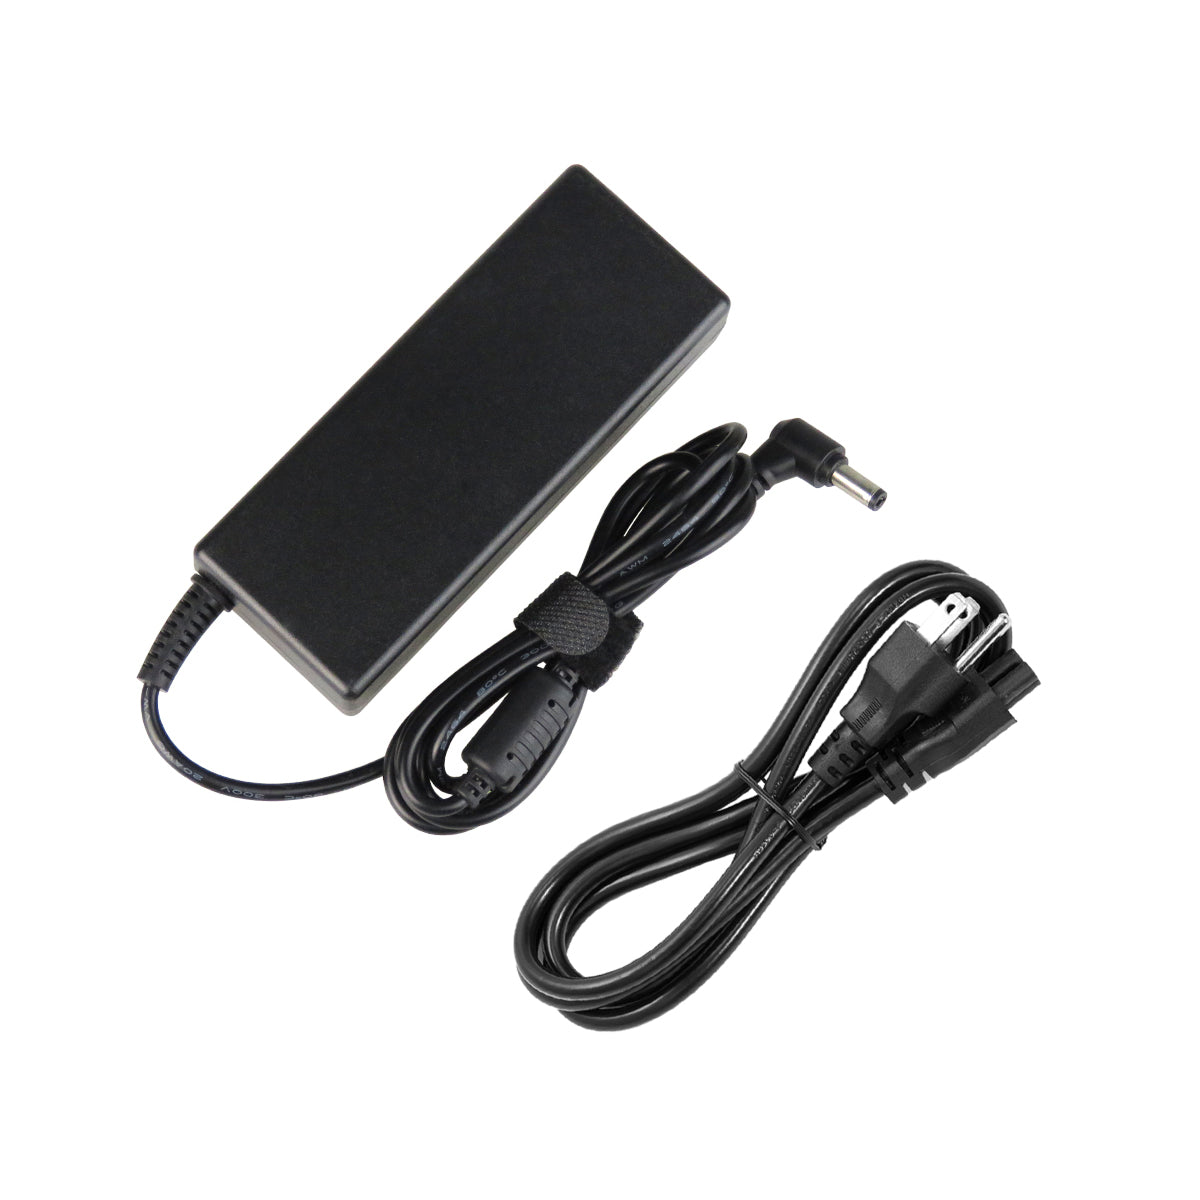 AC Adapter Charger for ASUS A8Jr Notebook.